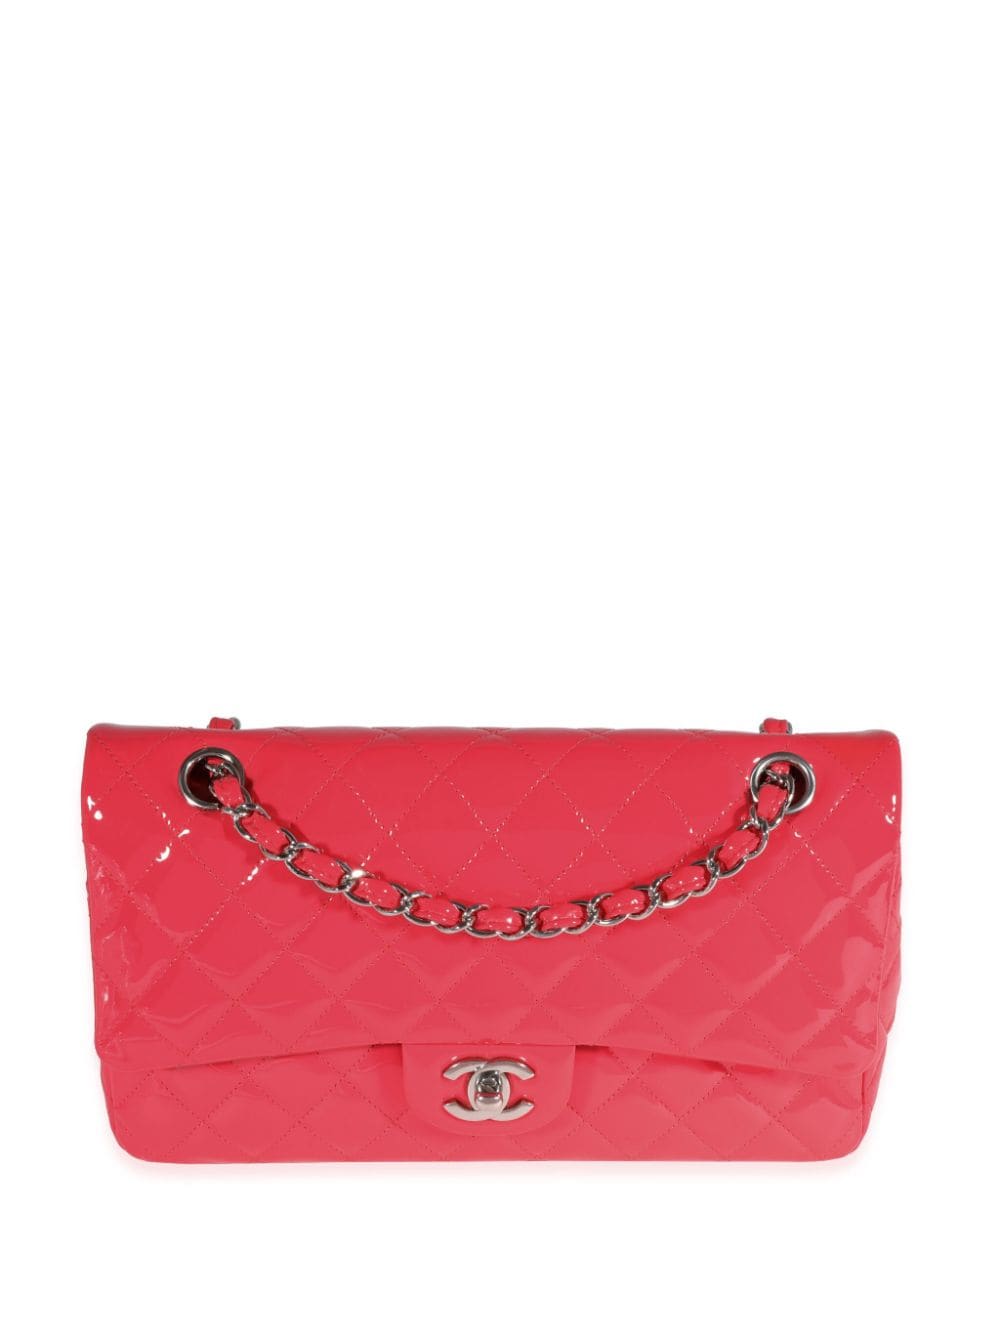 Pre-owned Chanel 2016-2017 Medium Double Flap Shoulder Bag In Red